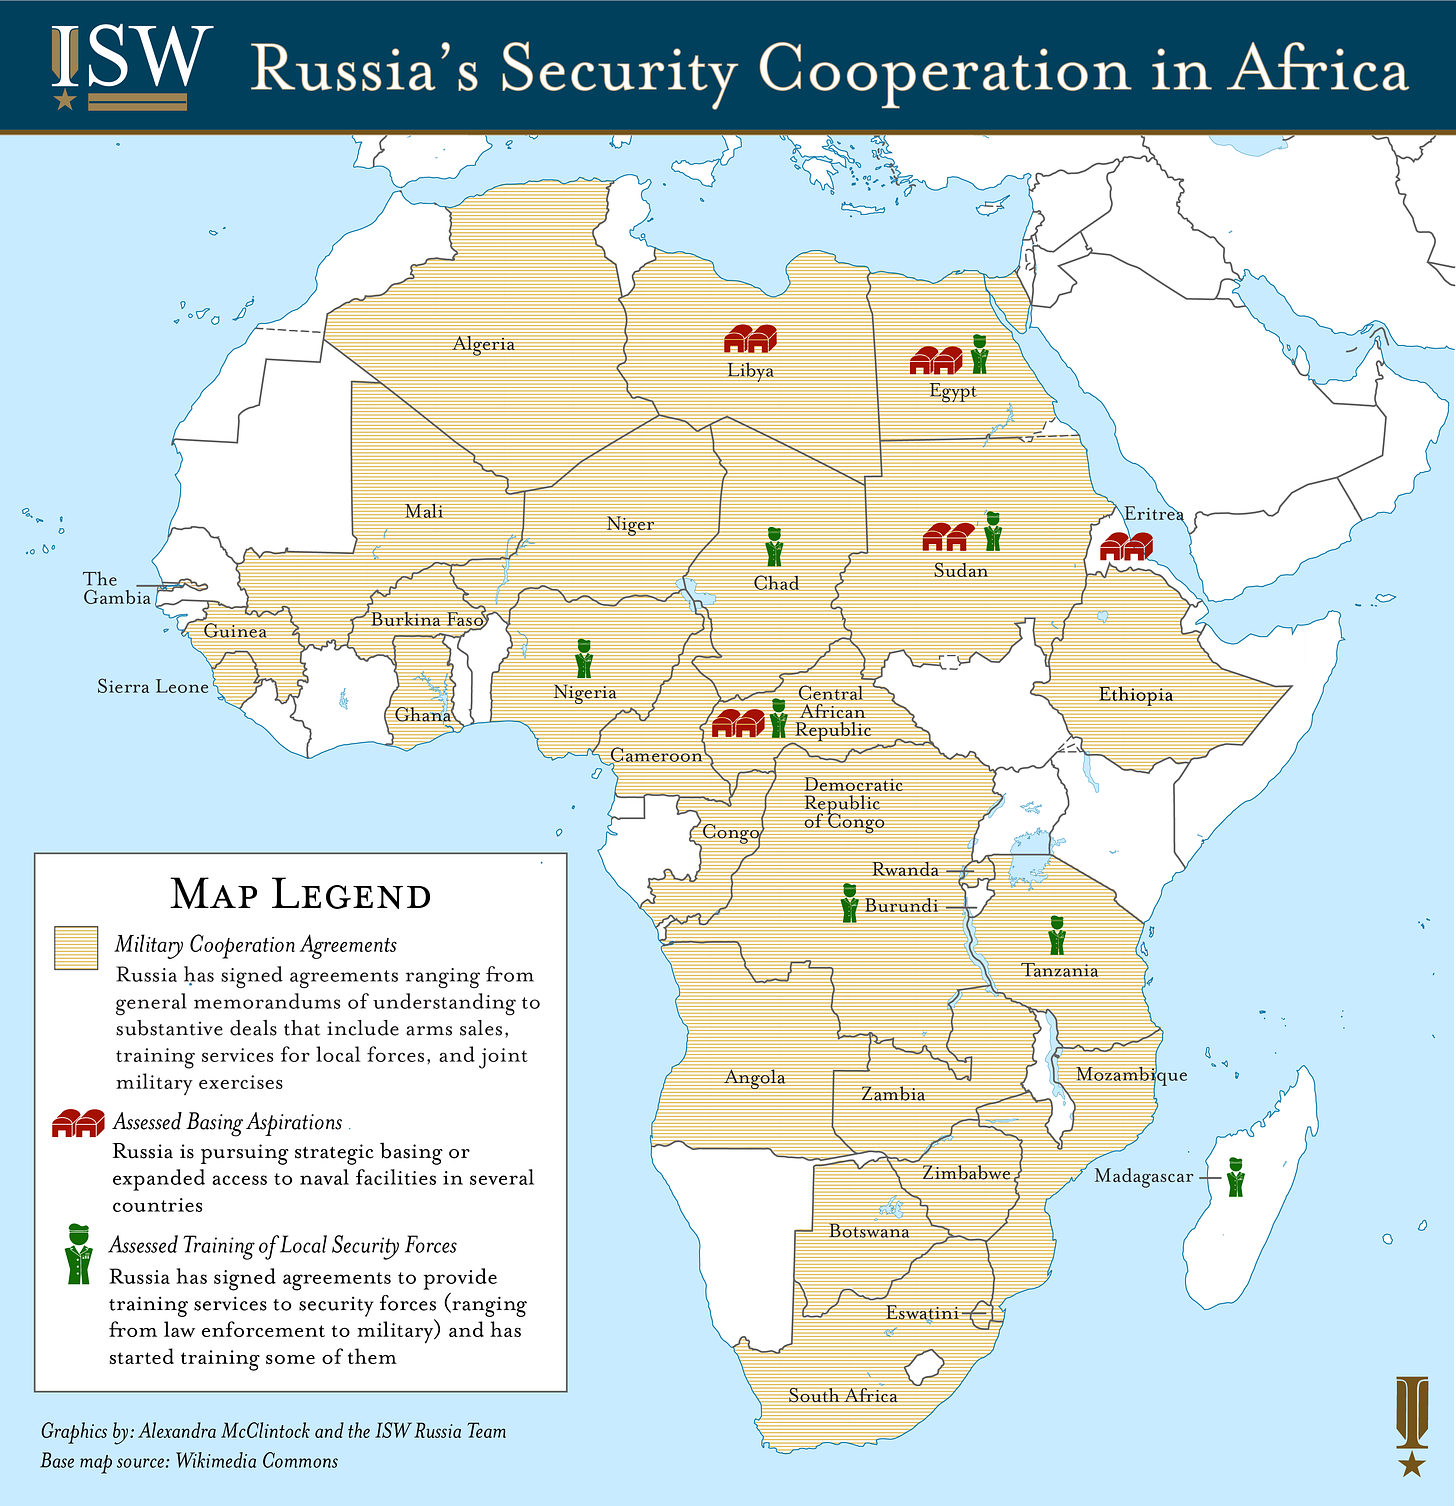 The Kremlin's Campaign in Africa | Institute for the Study of War